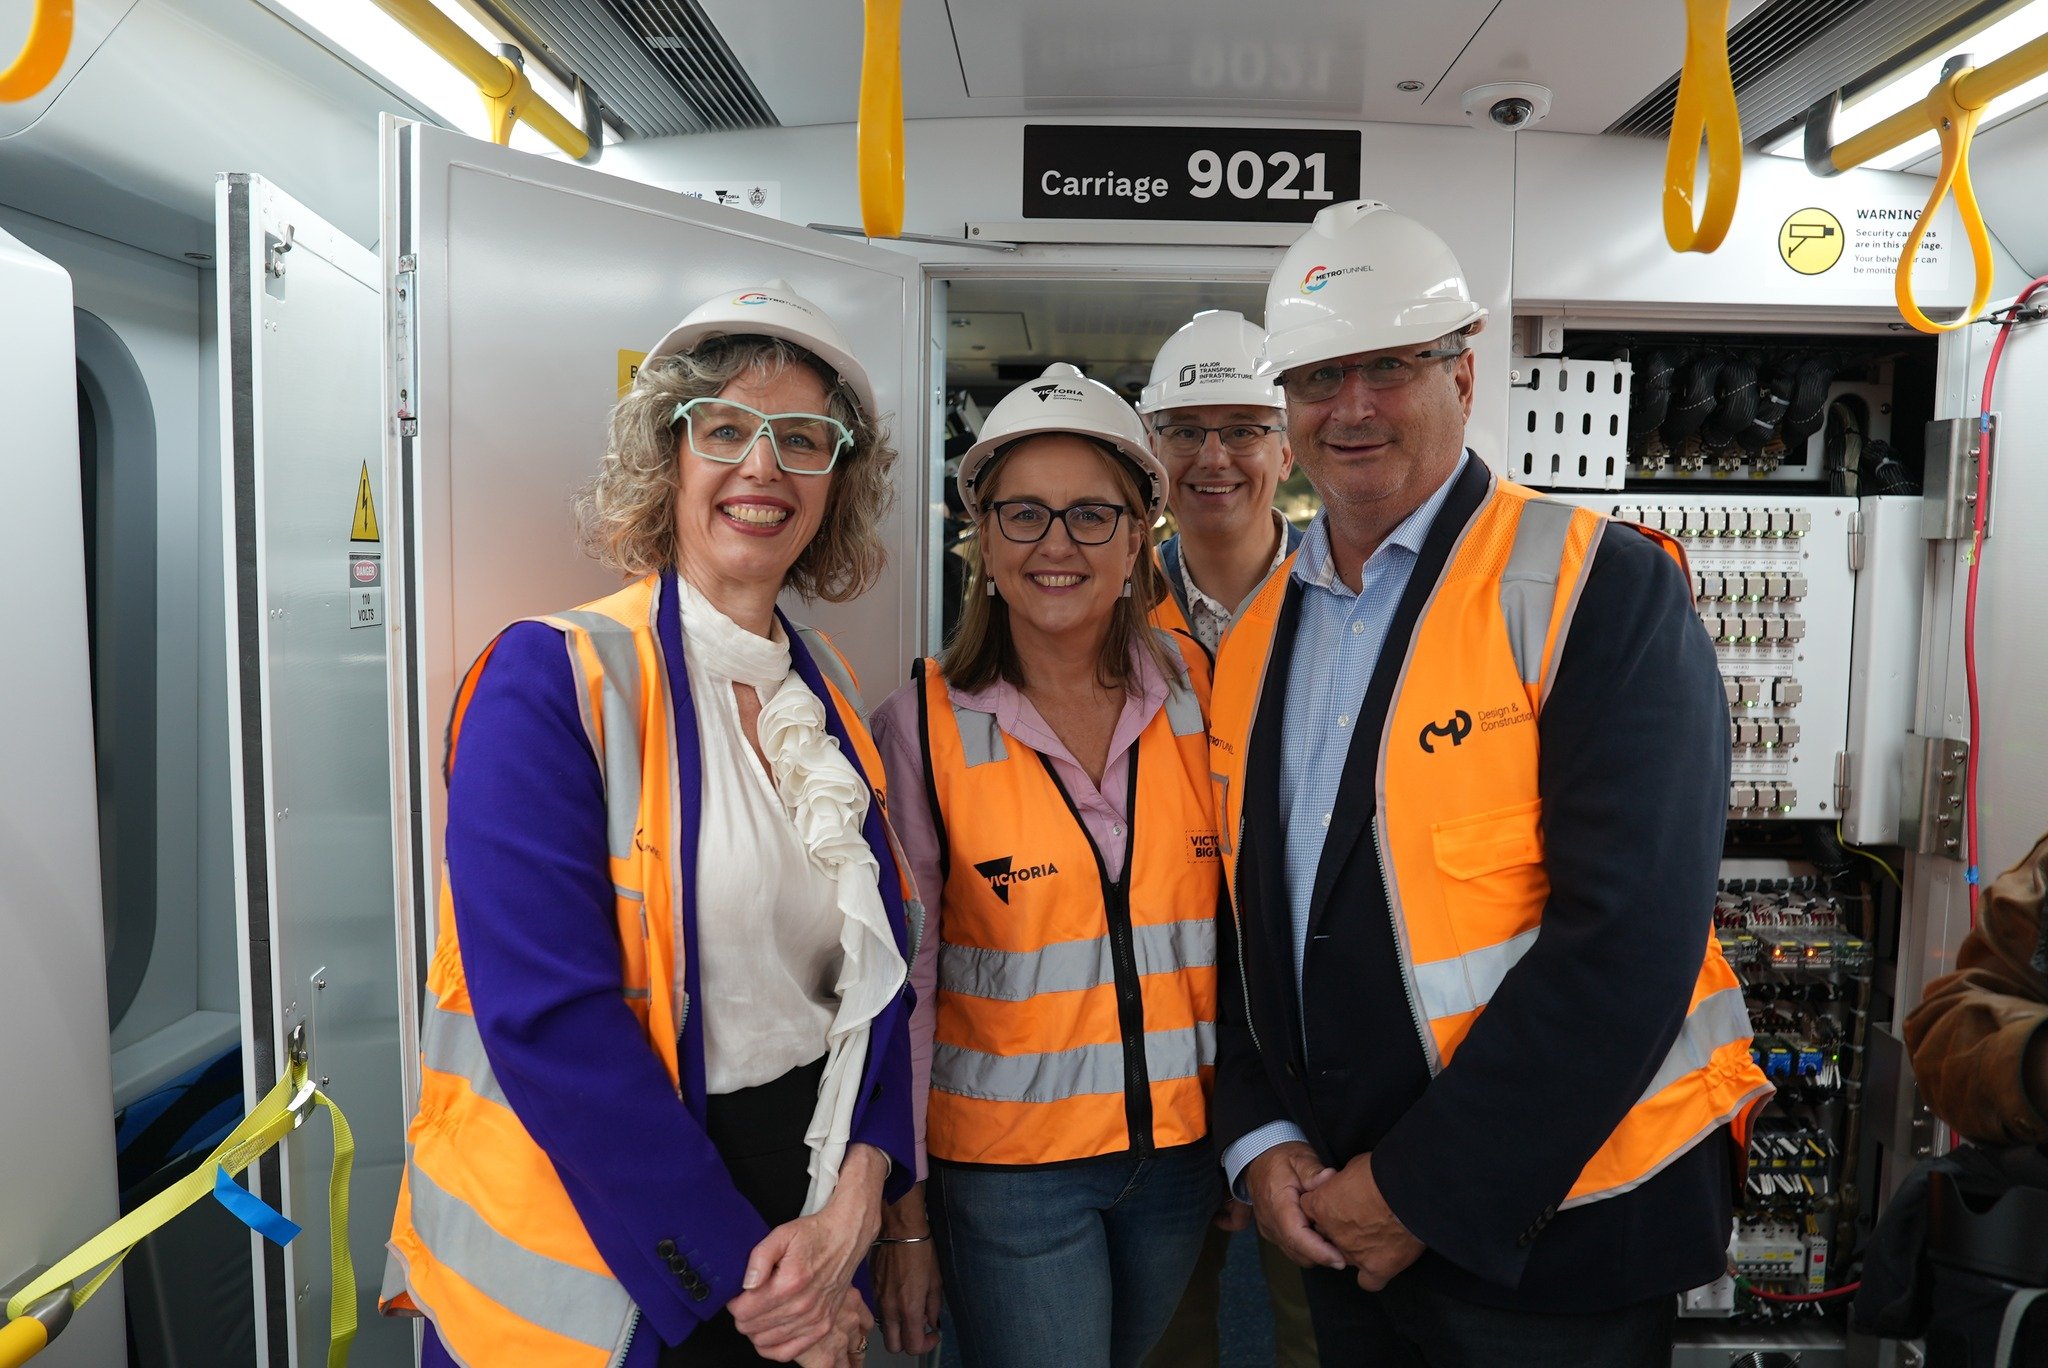 Today I took a train from Anzac Station to Parkville Station.

And it was incredible.

Thank you to Premier Jacinta Allan and Transport Infrastructure Minister Danny Pearson MP for Essendon for the opportunity.

The Metro Tunnel is going to change So